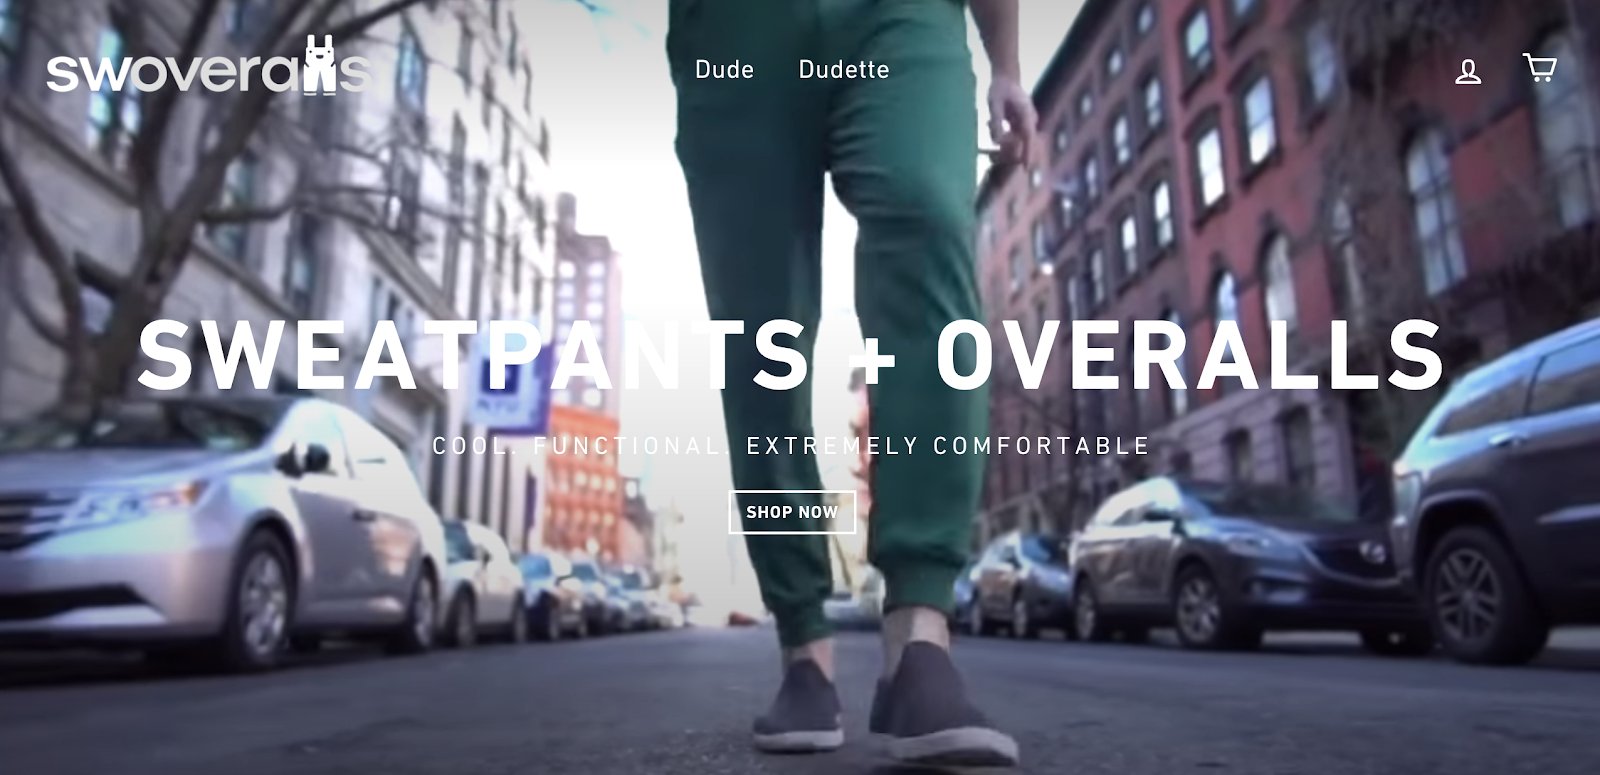 sweatpants-overalls-how-i-turned-a-silly-idea-into-a-viral-brand